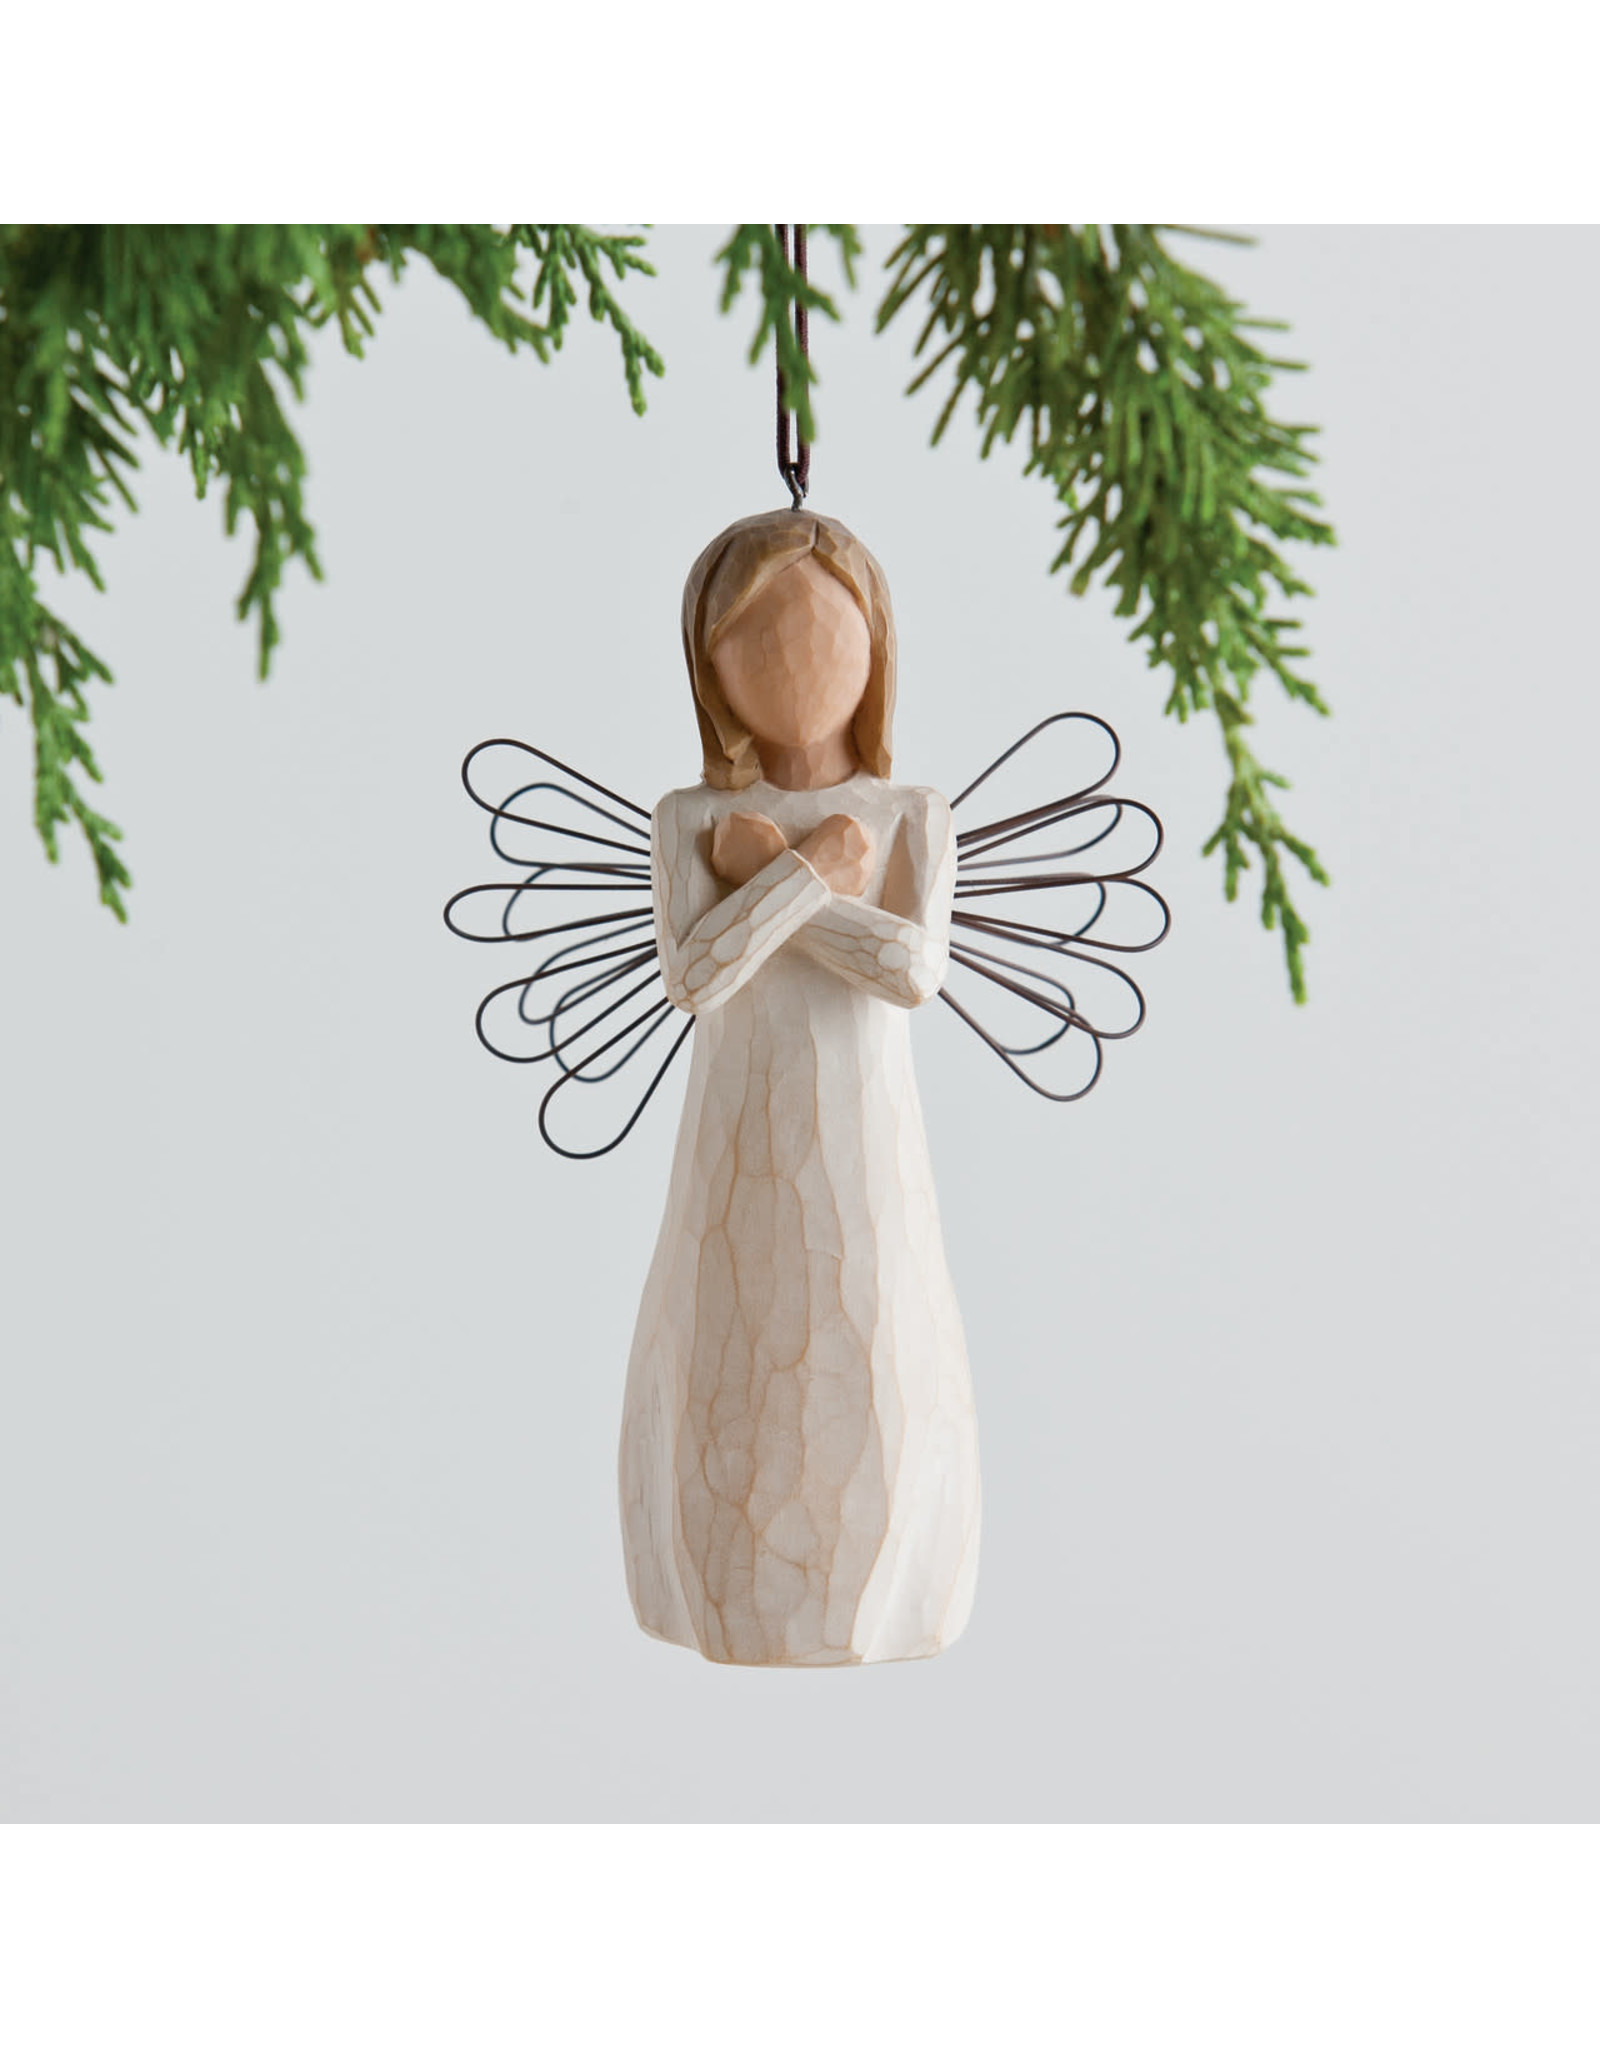 Willow Tree Ornament "Sign for Love"